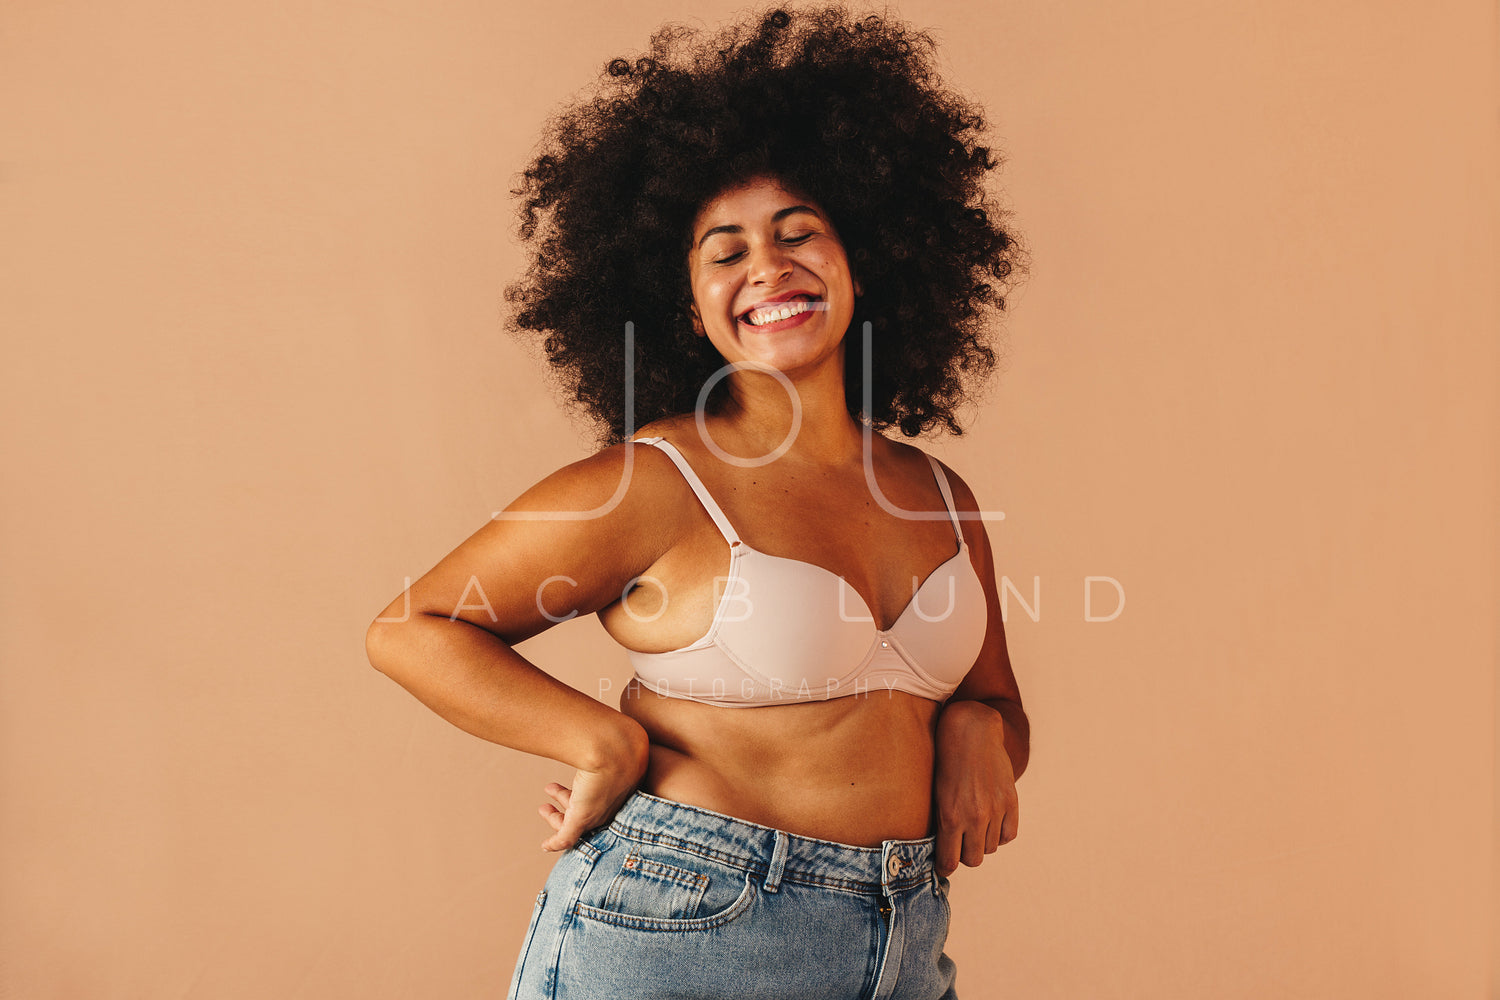 Premium Photo  Long haired women wearing bras stand together and embracing